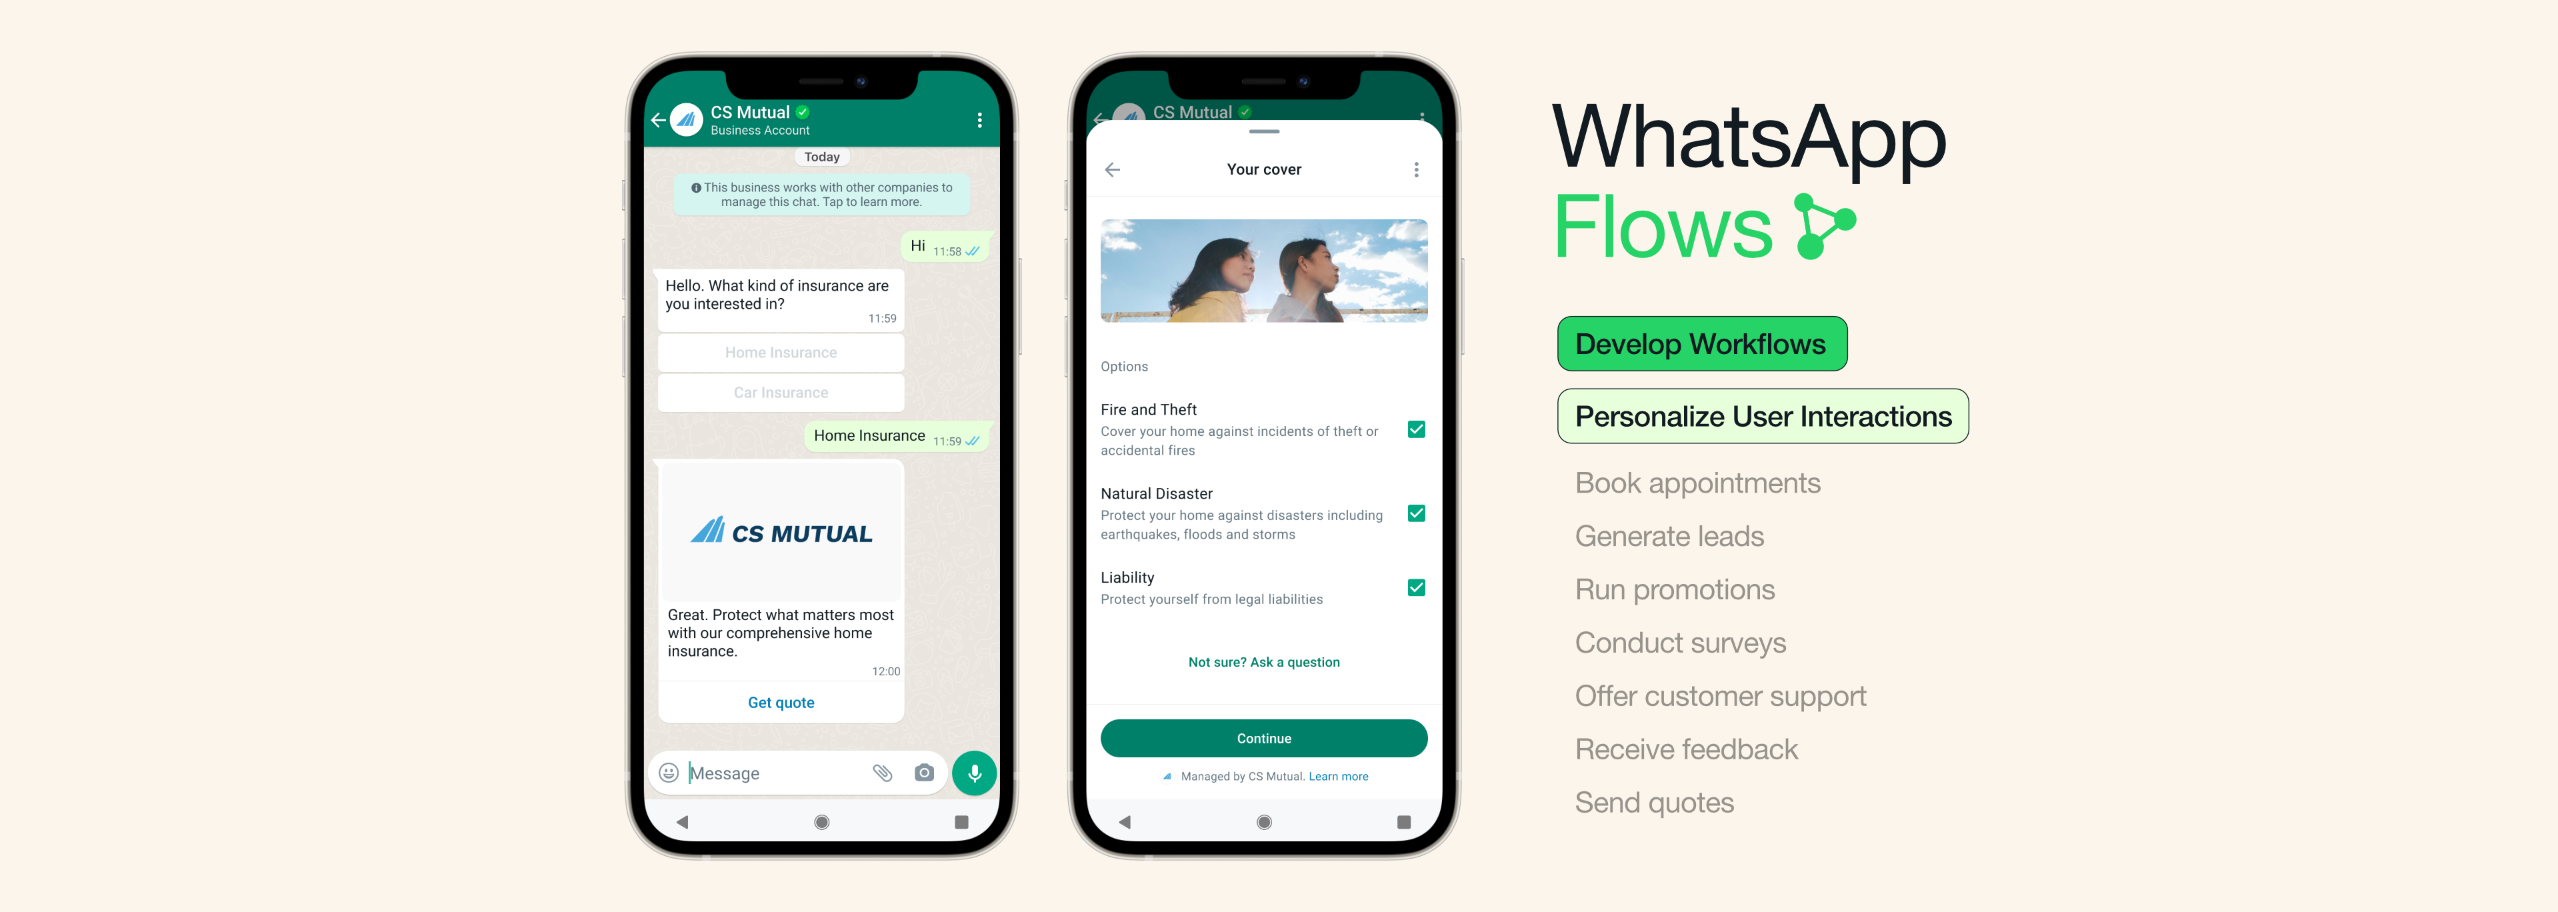 several use cases of whatsapp flows